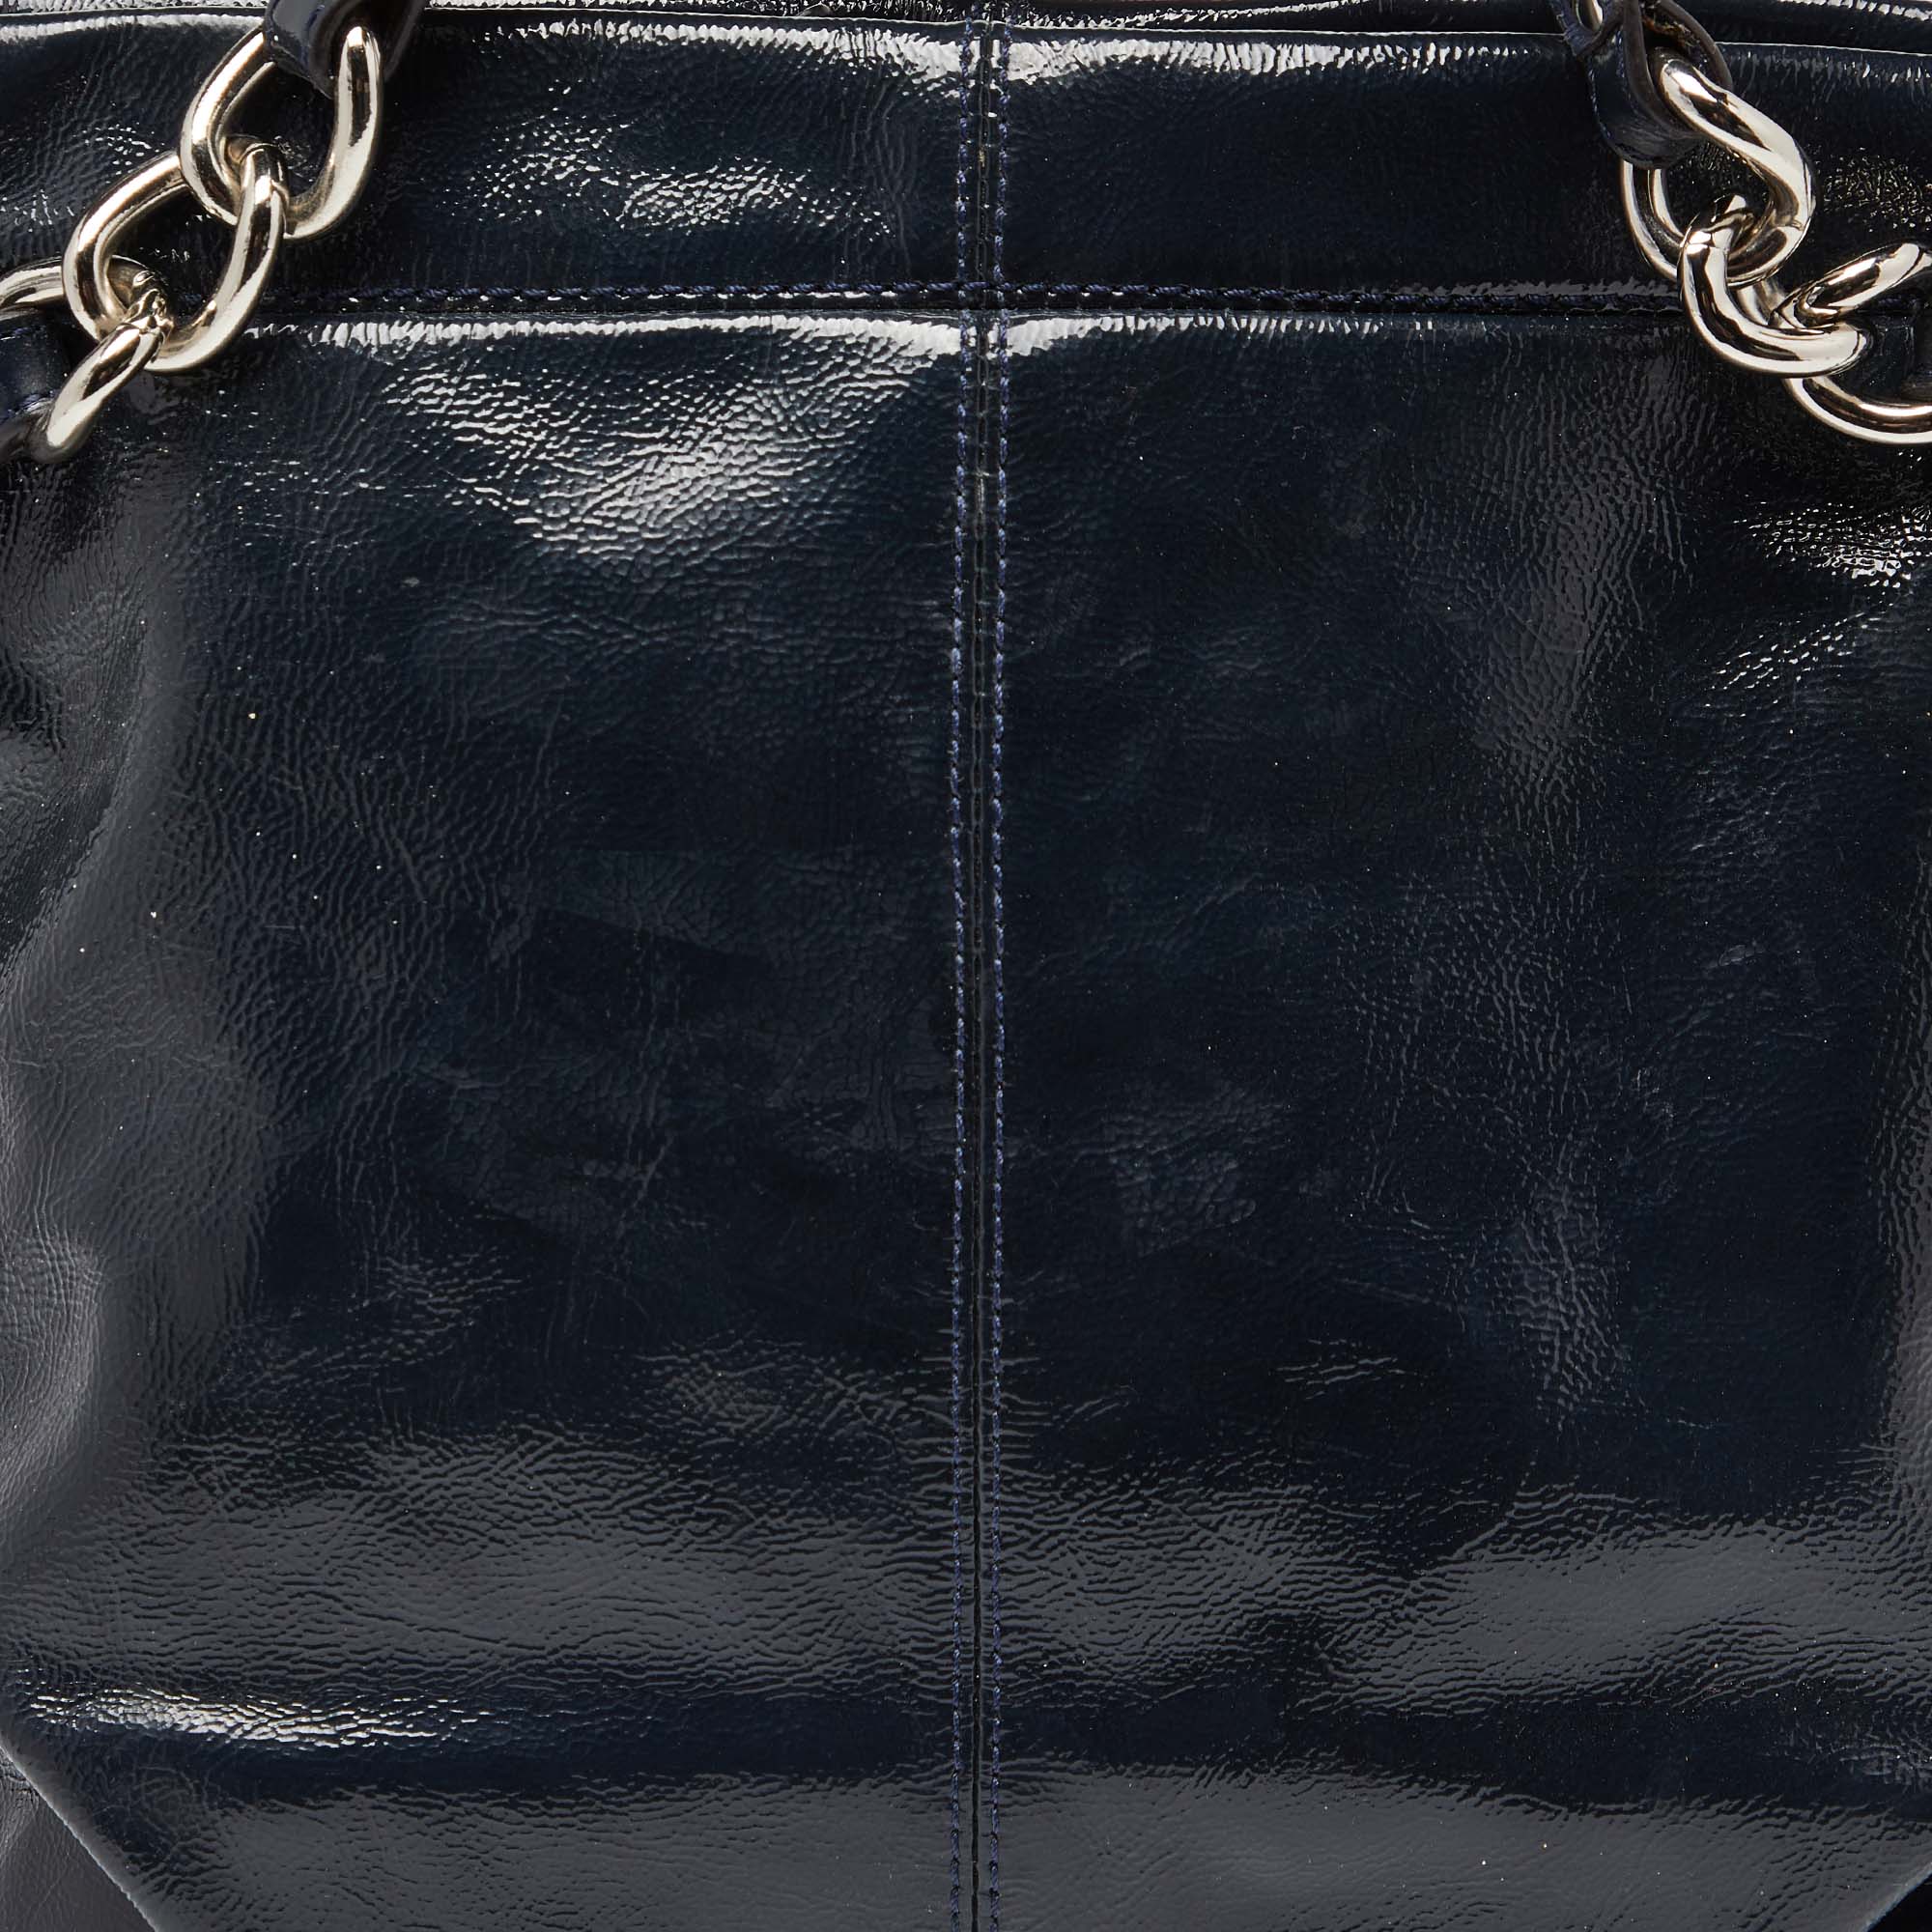 Coach Blue Patent Leather Brooke Hobo